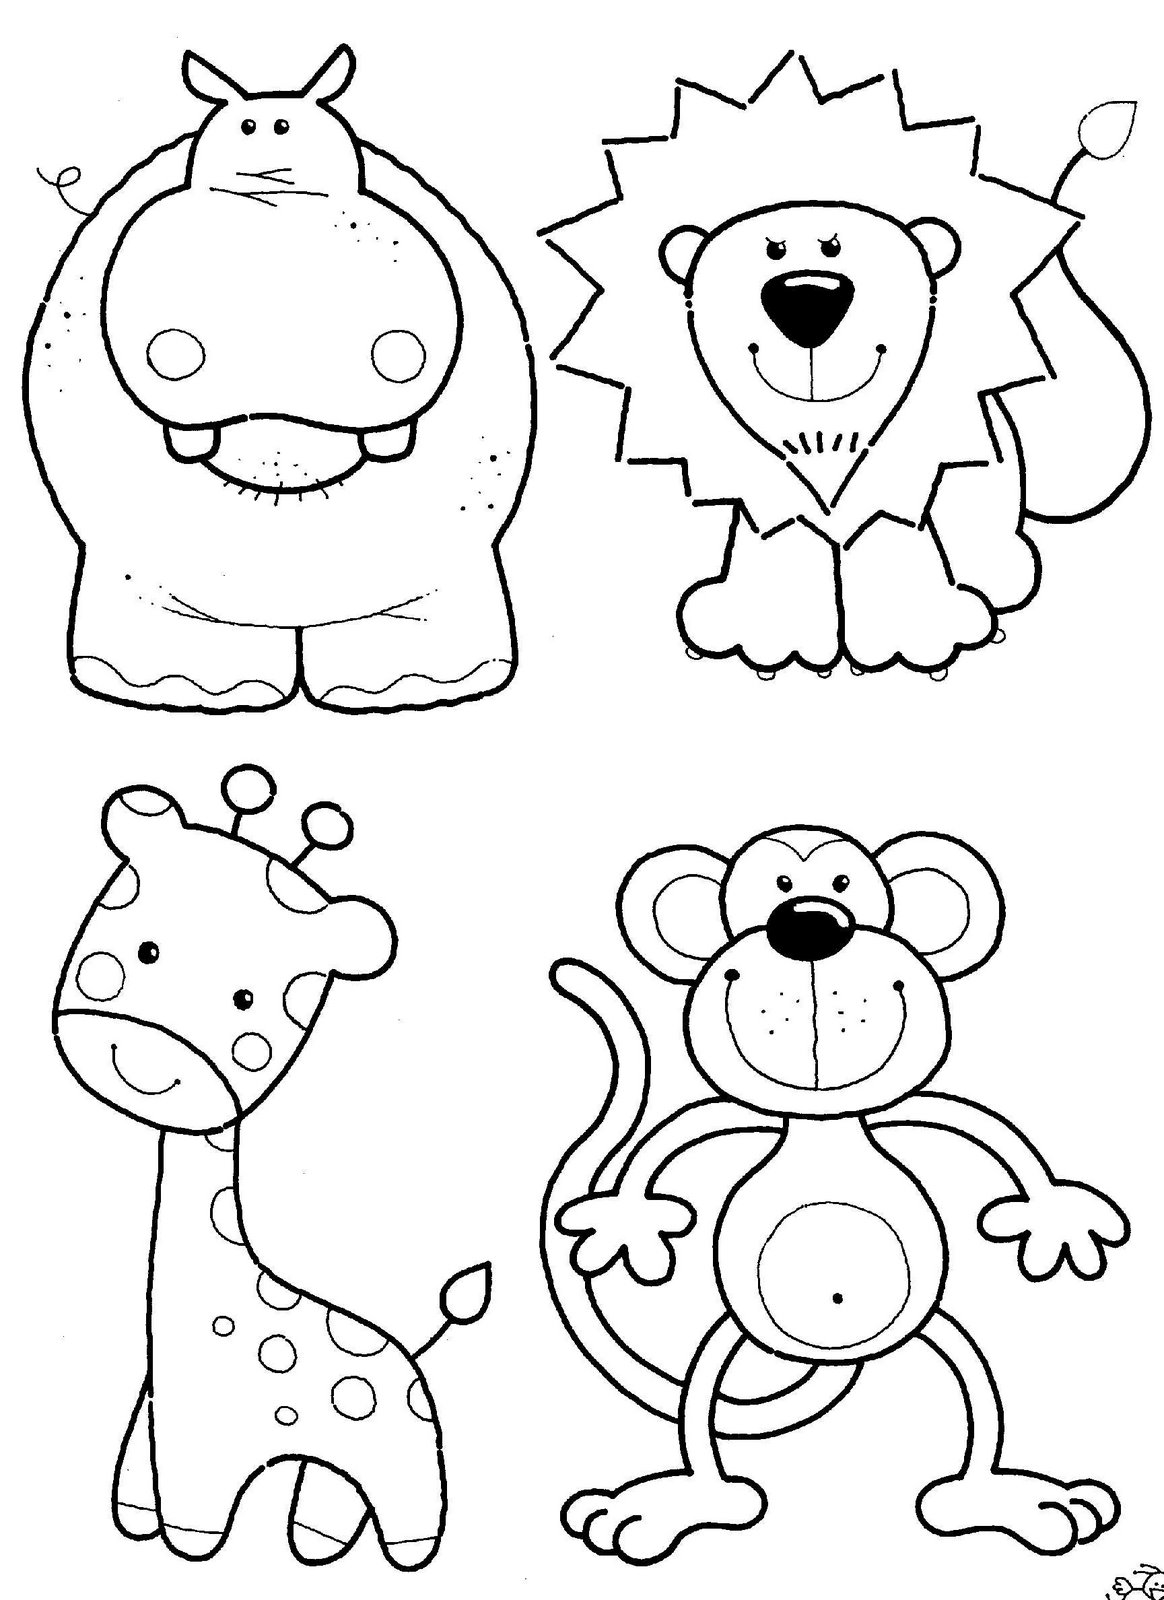 Free Animal Coloring Pages Image